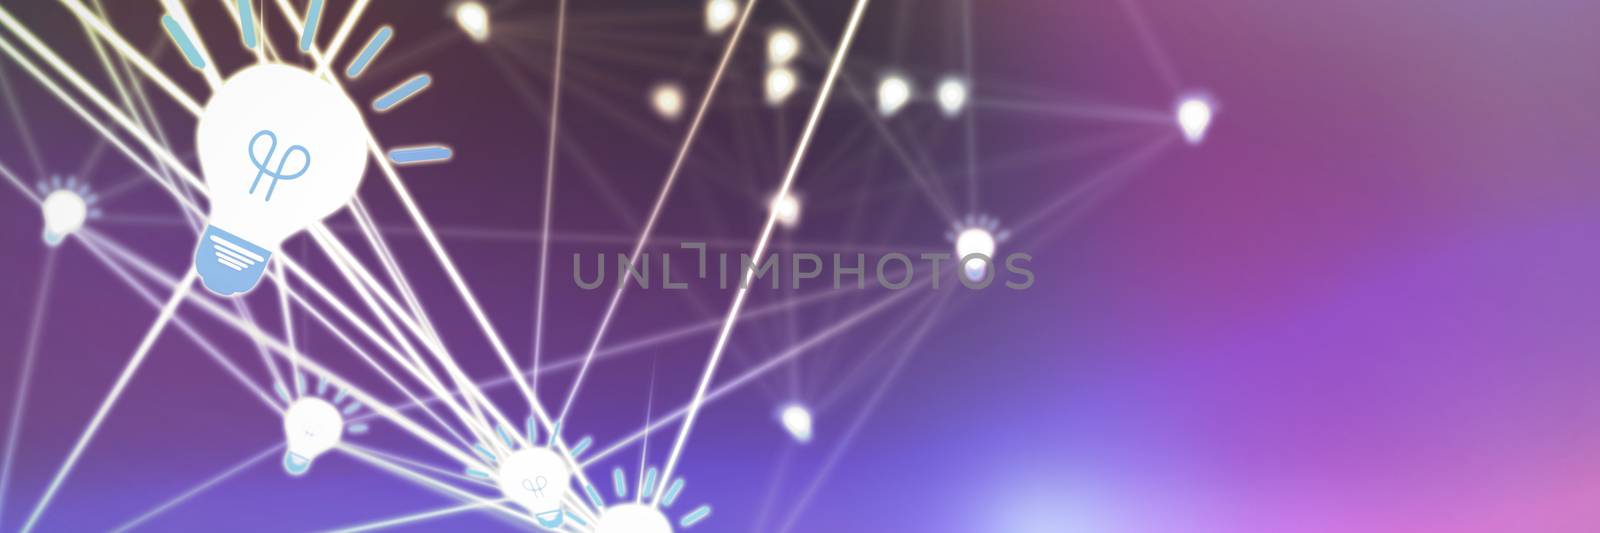 Composite image of abstract image of lightbulbs by Wavebreakmedia